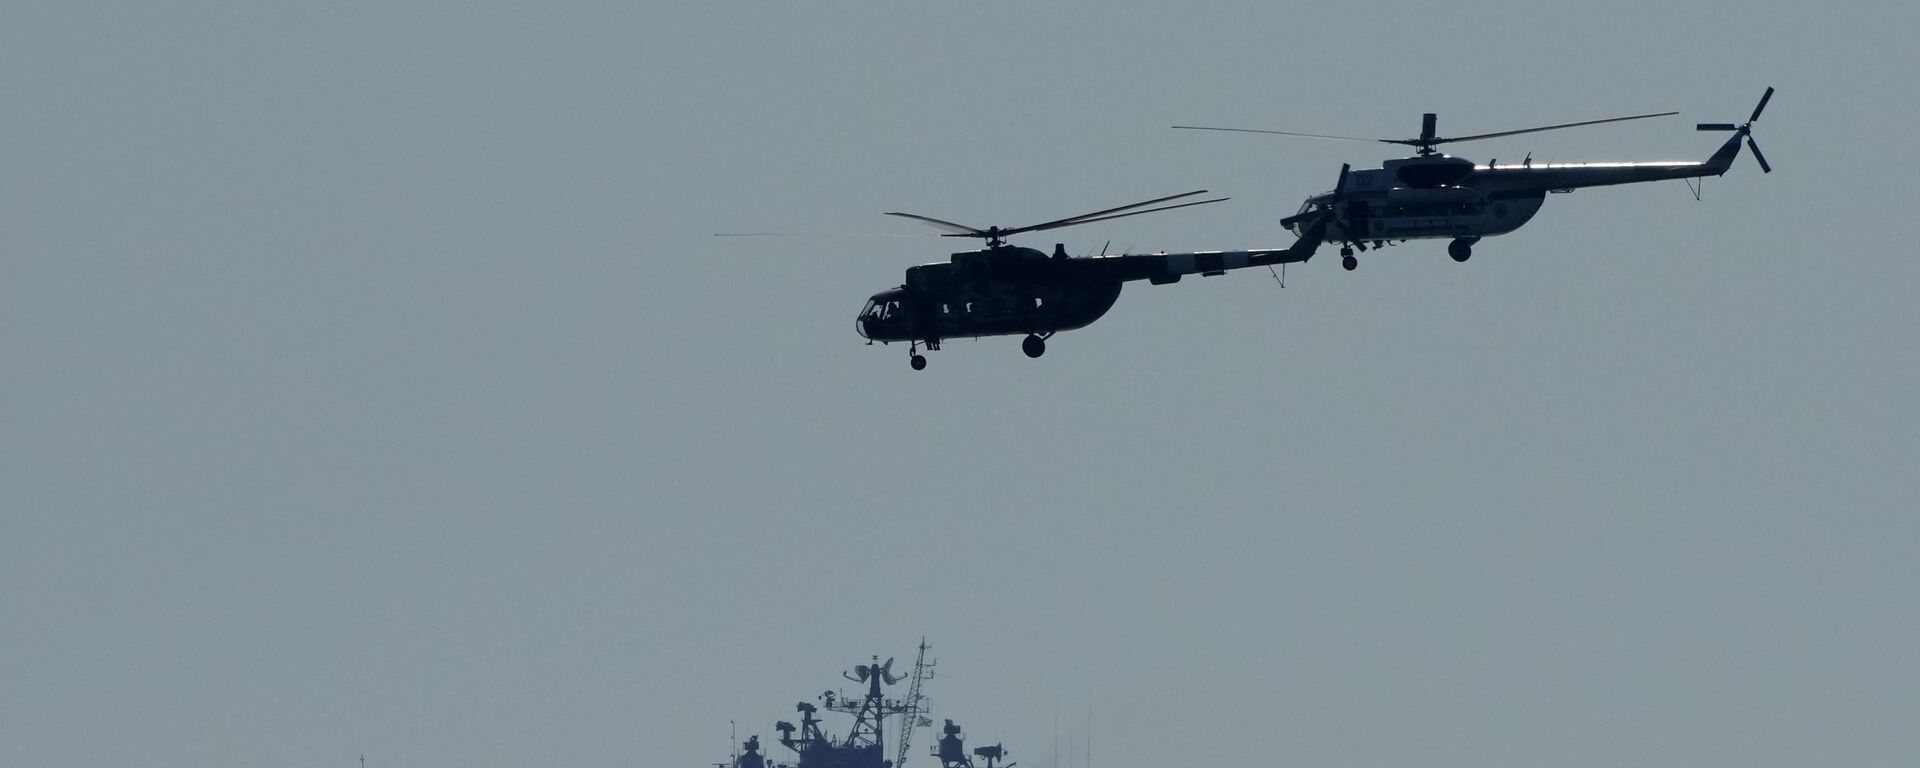 Ukrainian helicopters fly over a Russian warship  during Sea Breeze 2021 maneuvers, in the Black Sea, Friday, July 9, 2021 - Sputnik International, 1920, 04.03.2022